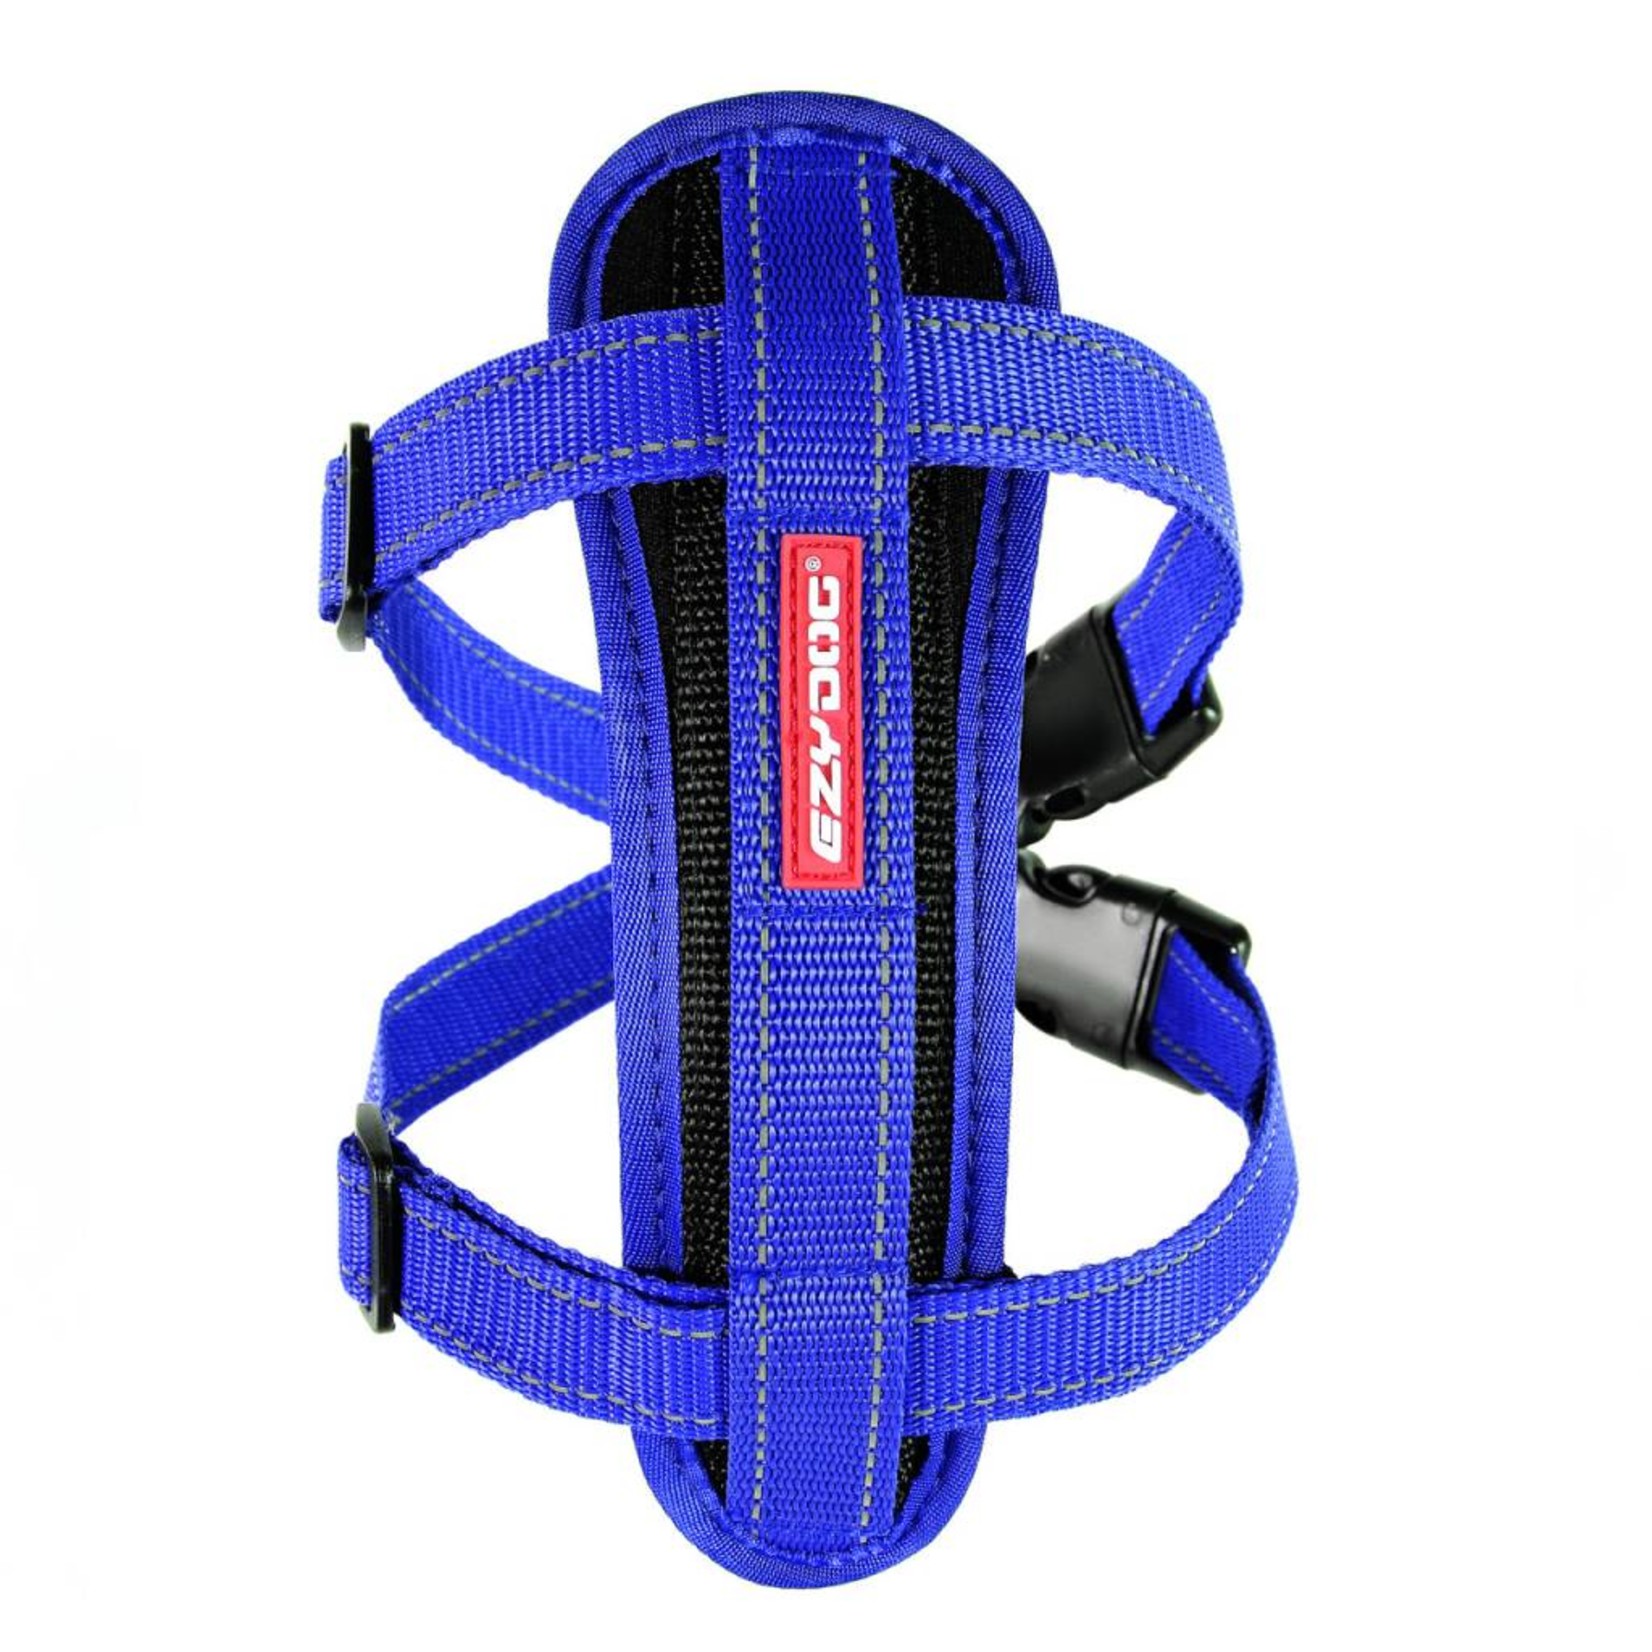 EzyDog Chest Plate Dog Harness with Seat Belt Loop, Blue